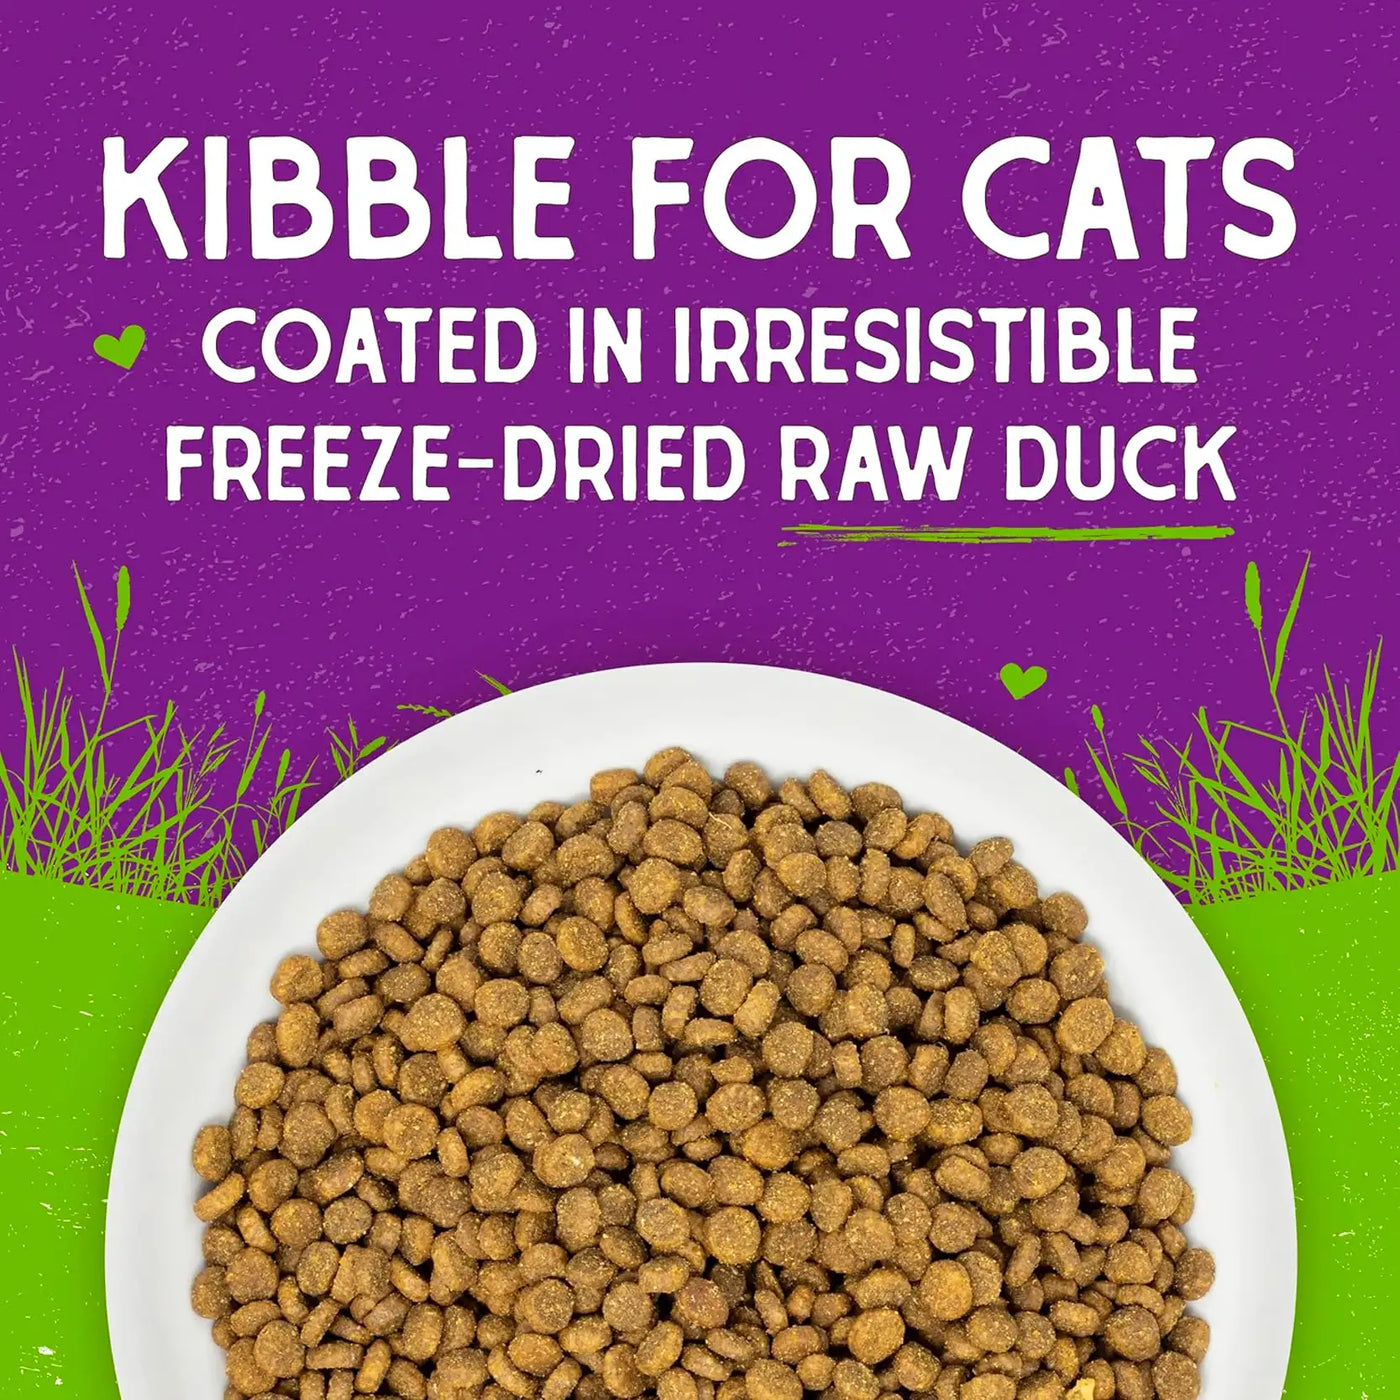 Stella & Chewy's - Freeze Dried Raw Coated Kibble for Cats (Cage-Free Duck Recipe)